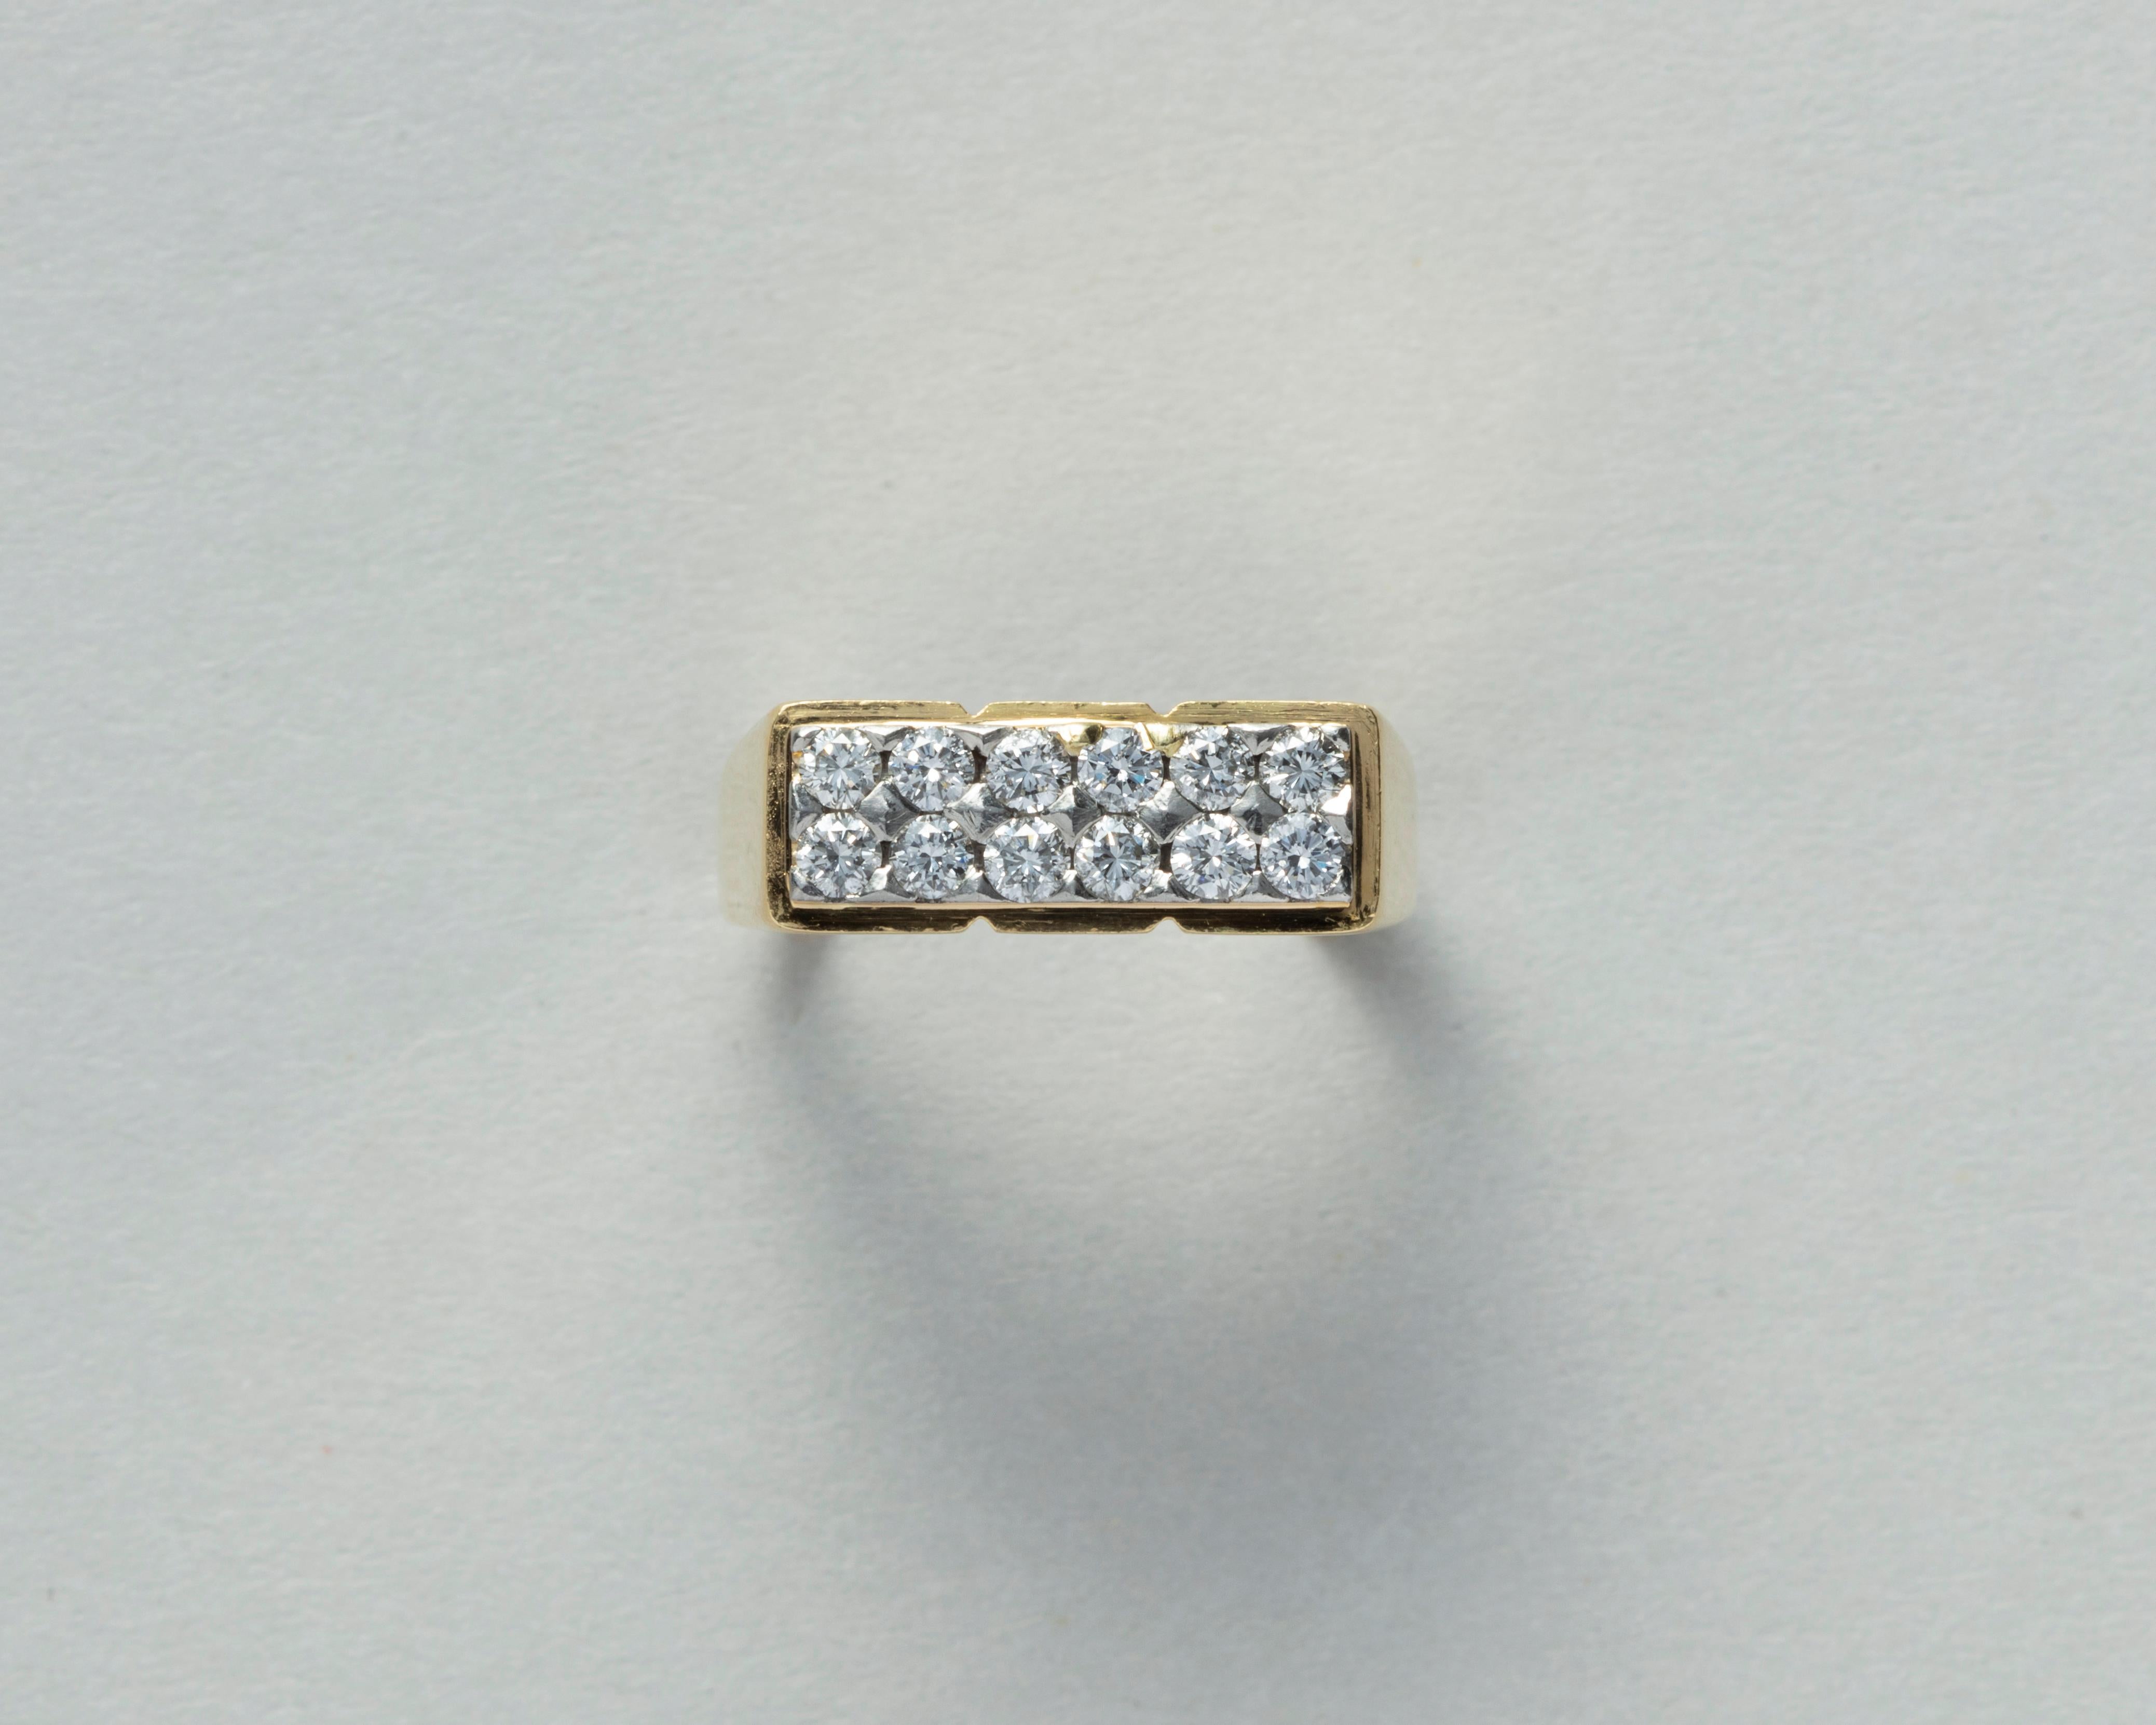 An 18 carat gold ring with a rectangular top set with two rows of 6 brilliant cut diamonds (appr. 0.48 carat in total) in white gold the upper part of the ring is divided in 3 parts. signed: Fred, Paris circa 1970.

weight: 8.12 grams
ring size: